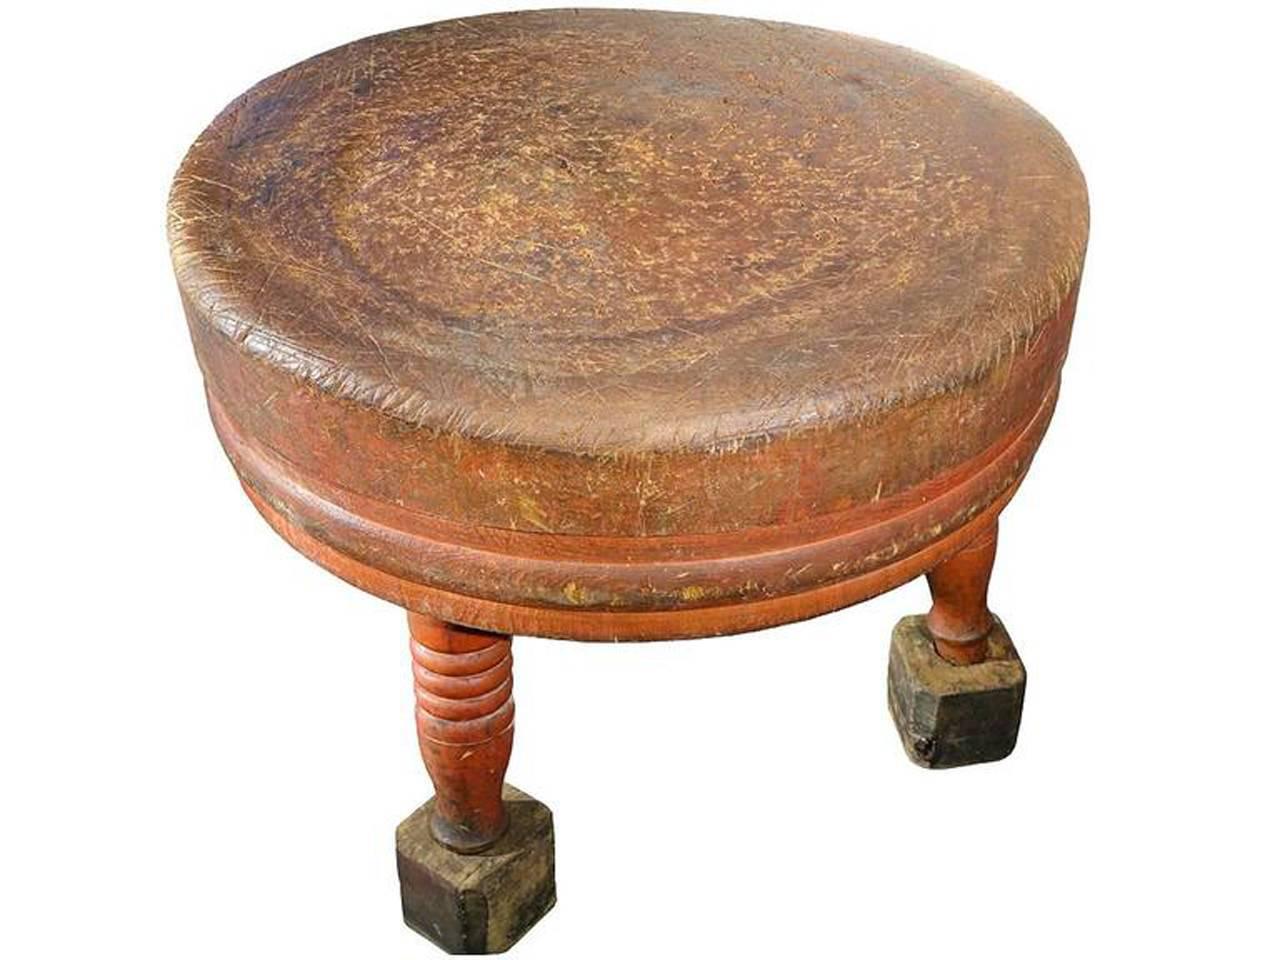 Early American made butcher's block, solid wood, with the original red milk-wash paint. Turn of the century from, circa mid-1800s. The block has an amazing patina that will only come from a 100 plus years of use. It has an impressive 3 foot diameter